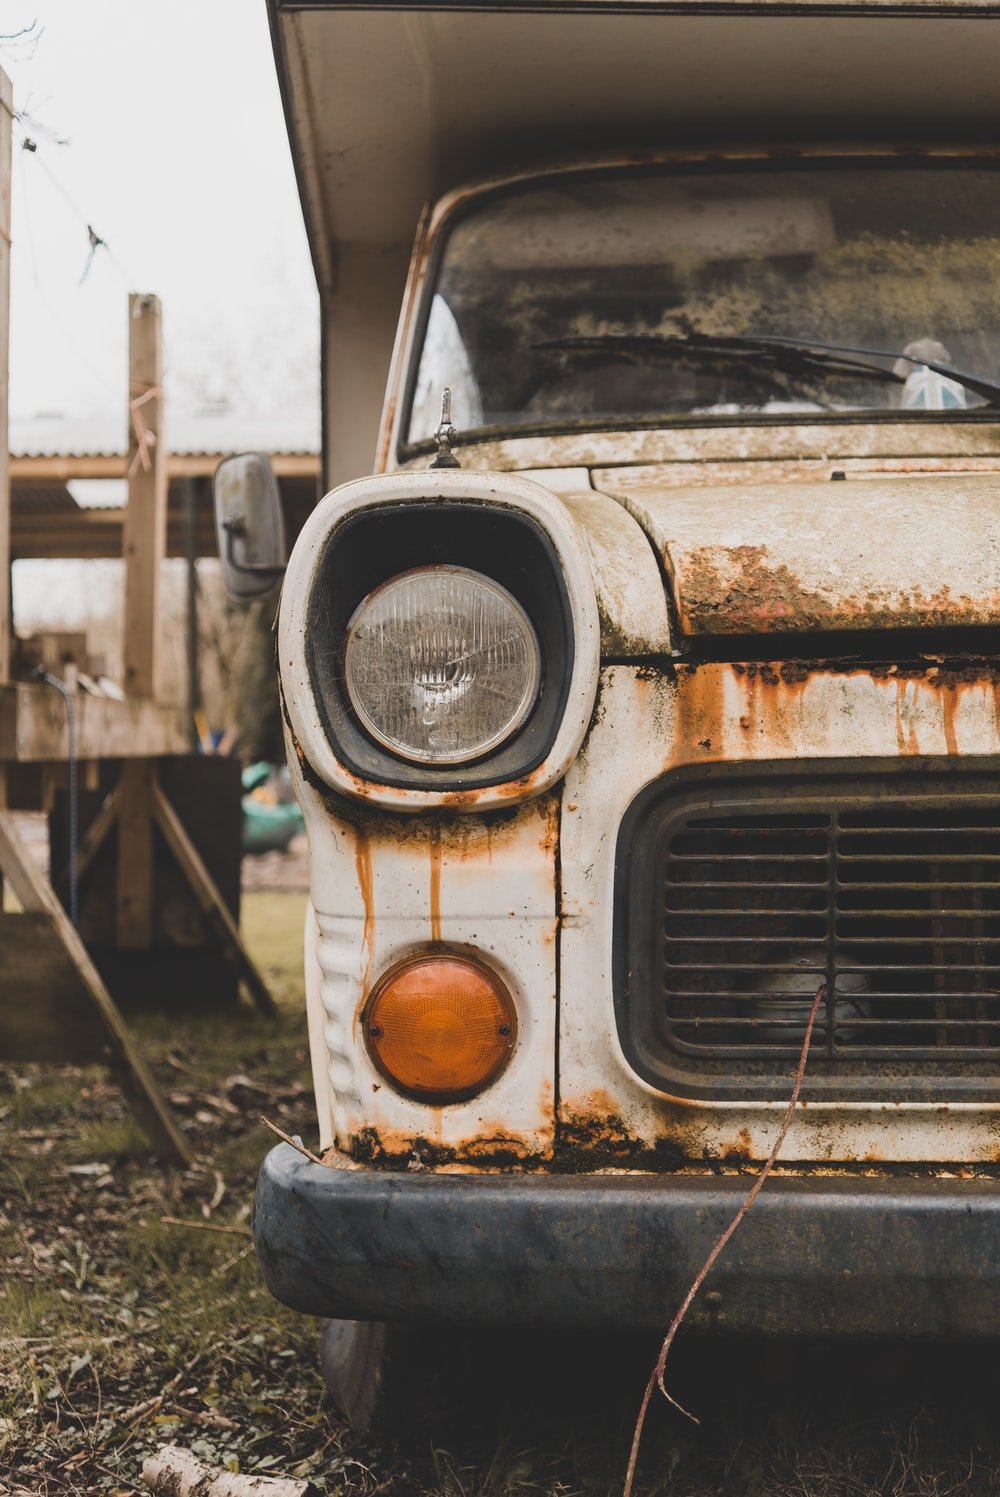 Best Abandoned Car Picture [HD]. Download Free Image